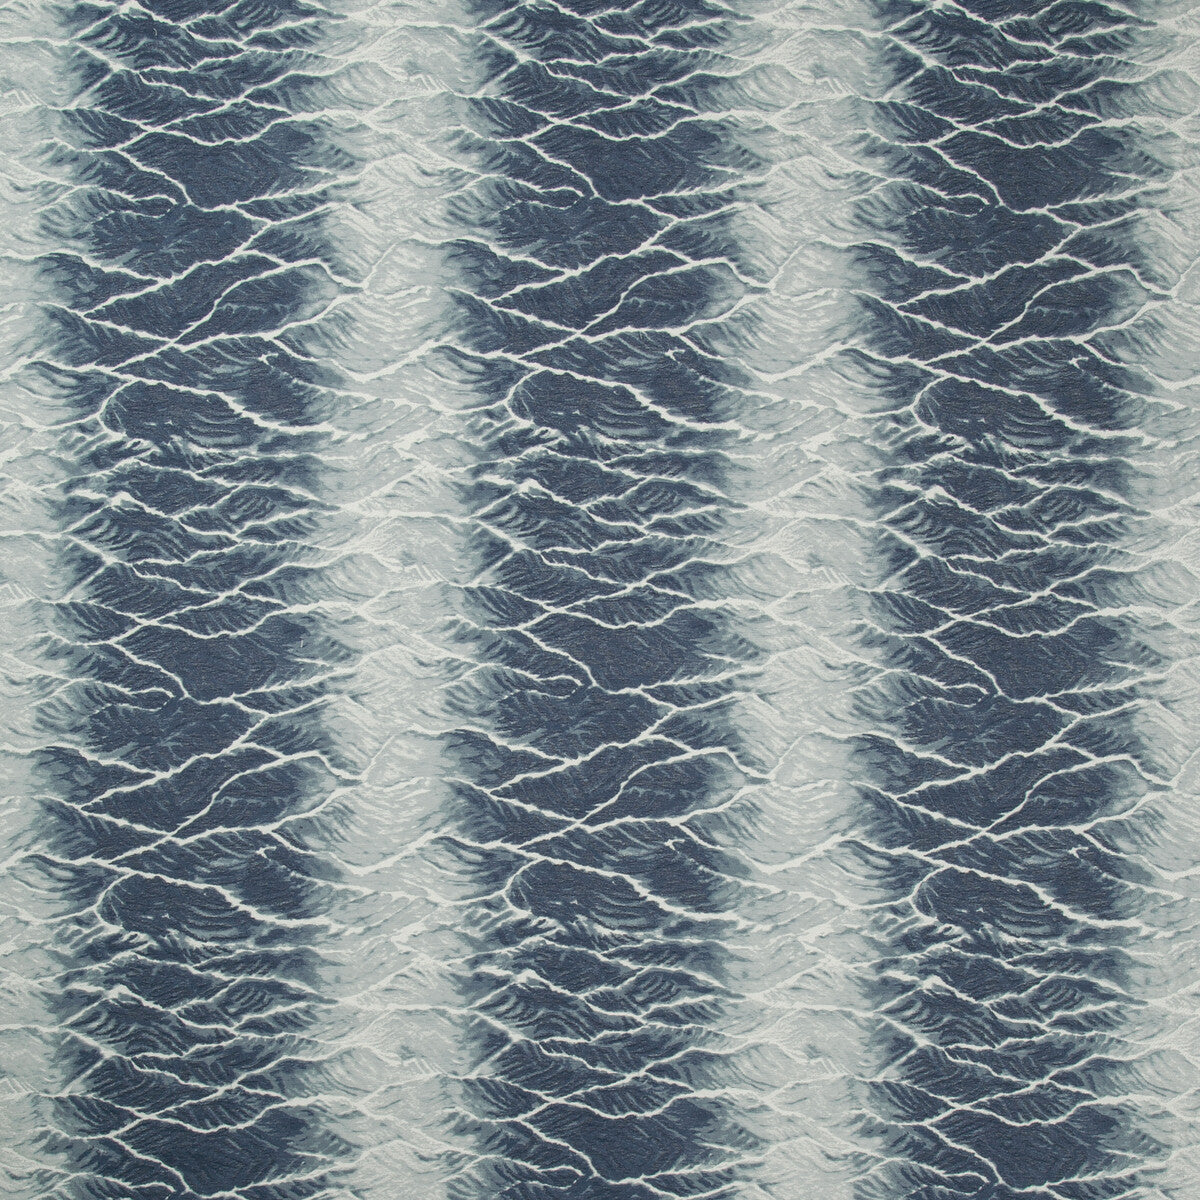 Onsen fabric in indigo color - pattern 35415.5.0 - by Kravet Couture in the Izu Collection collection